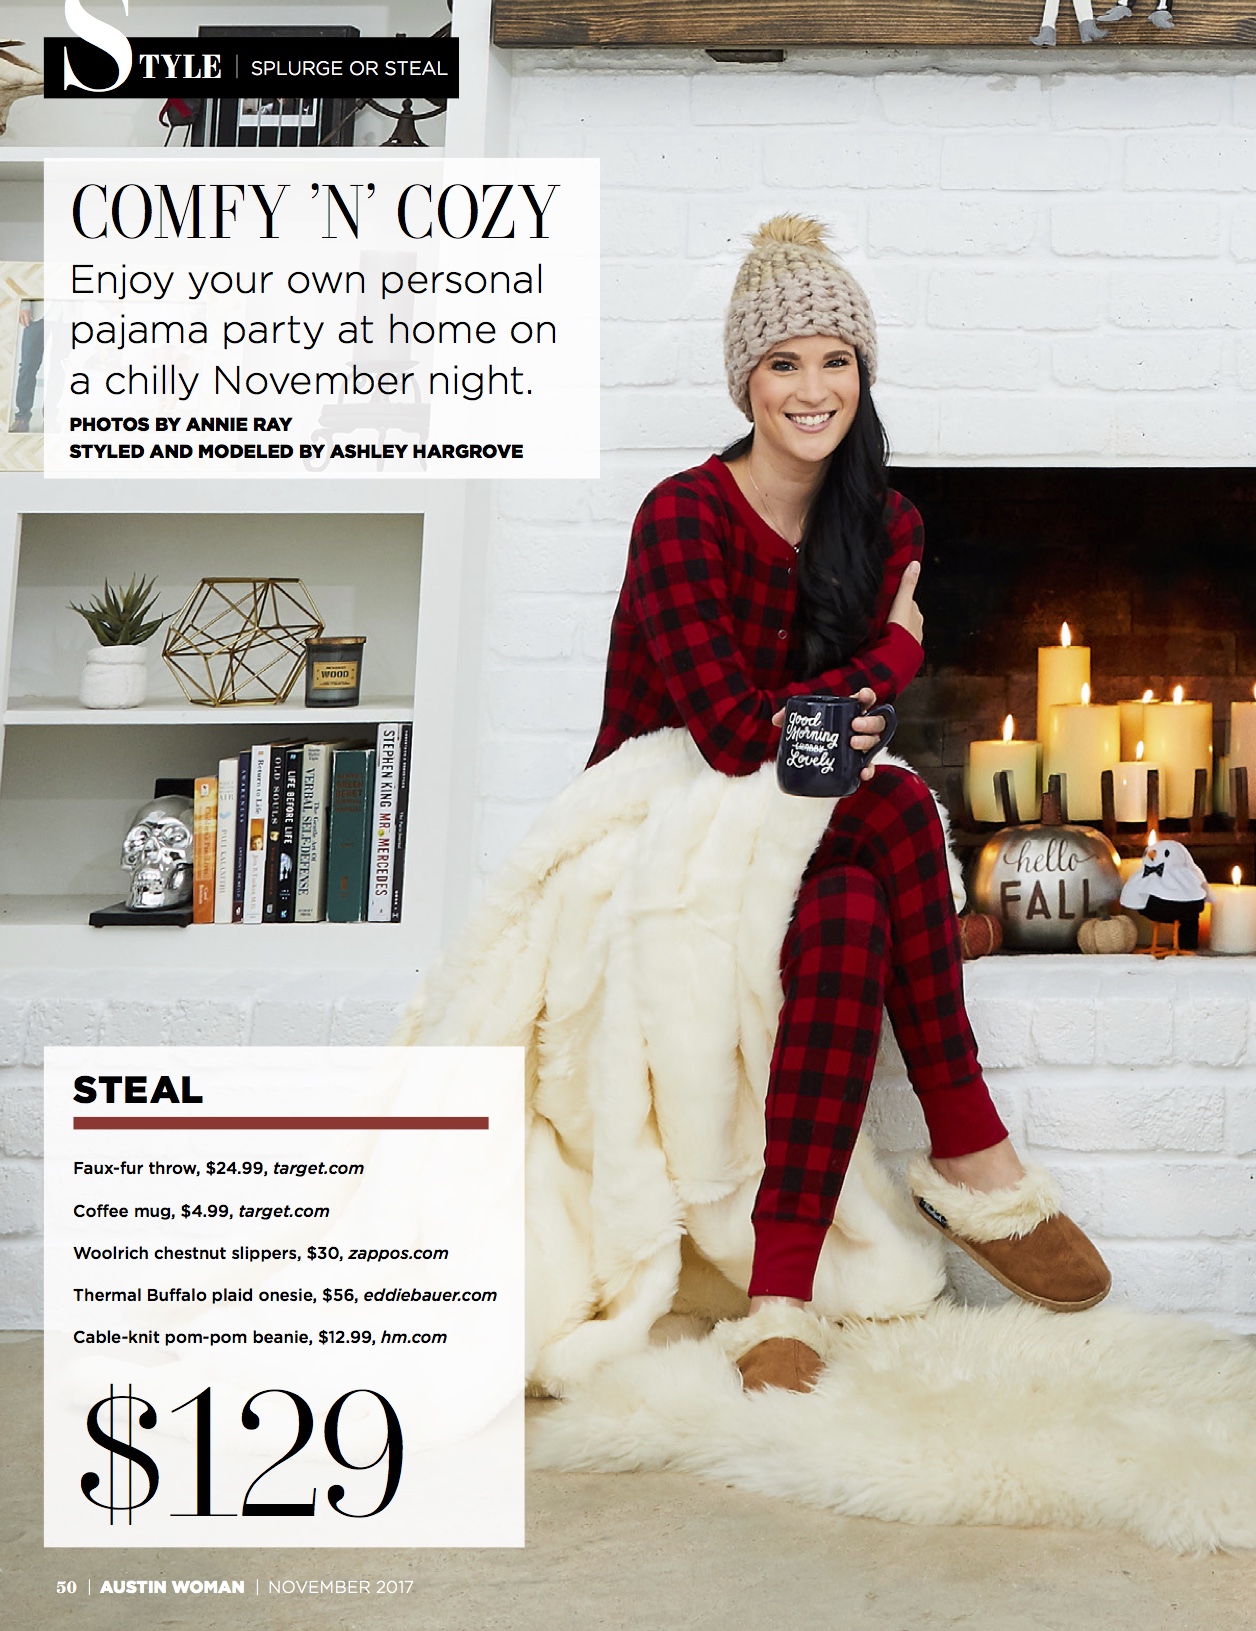 DTKAustin shares her recent Splurge or Steal Column about plaid pajamas in Austin Woman Magazine just in time for winter!